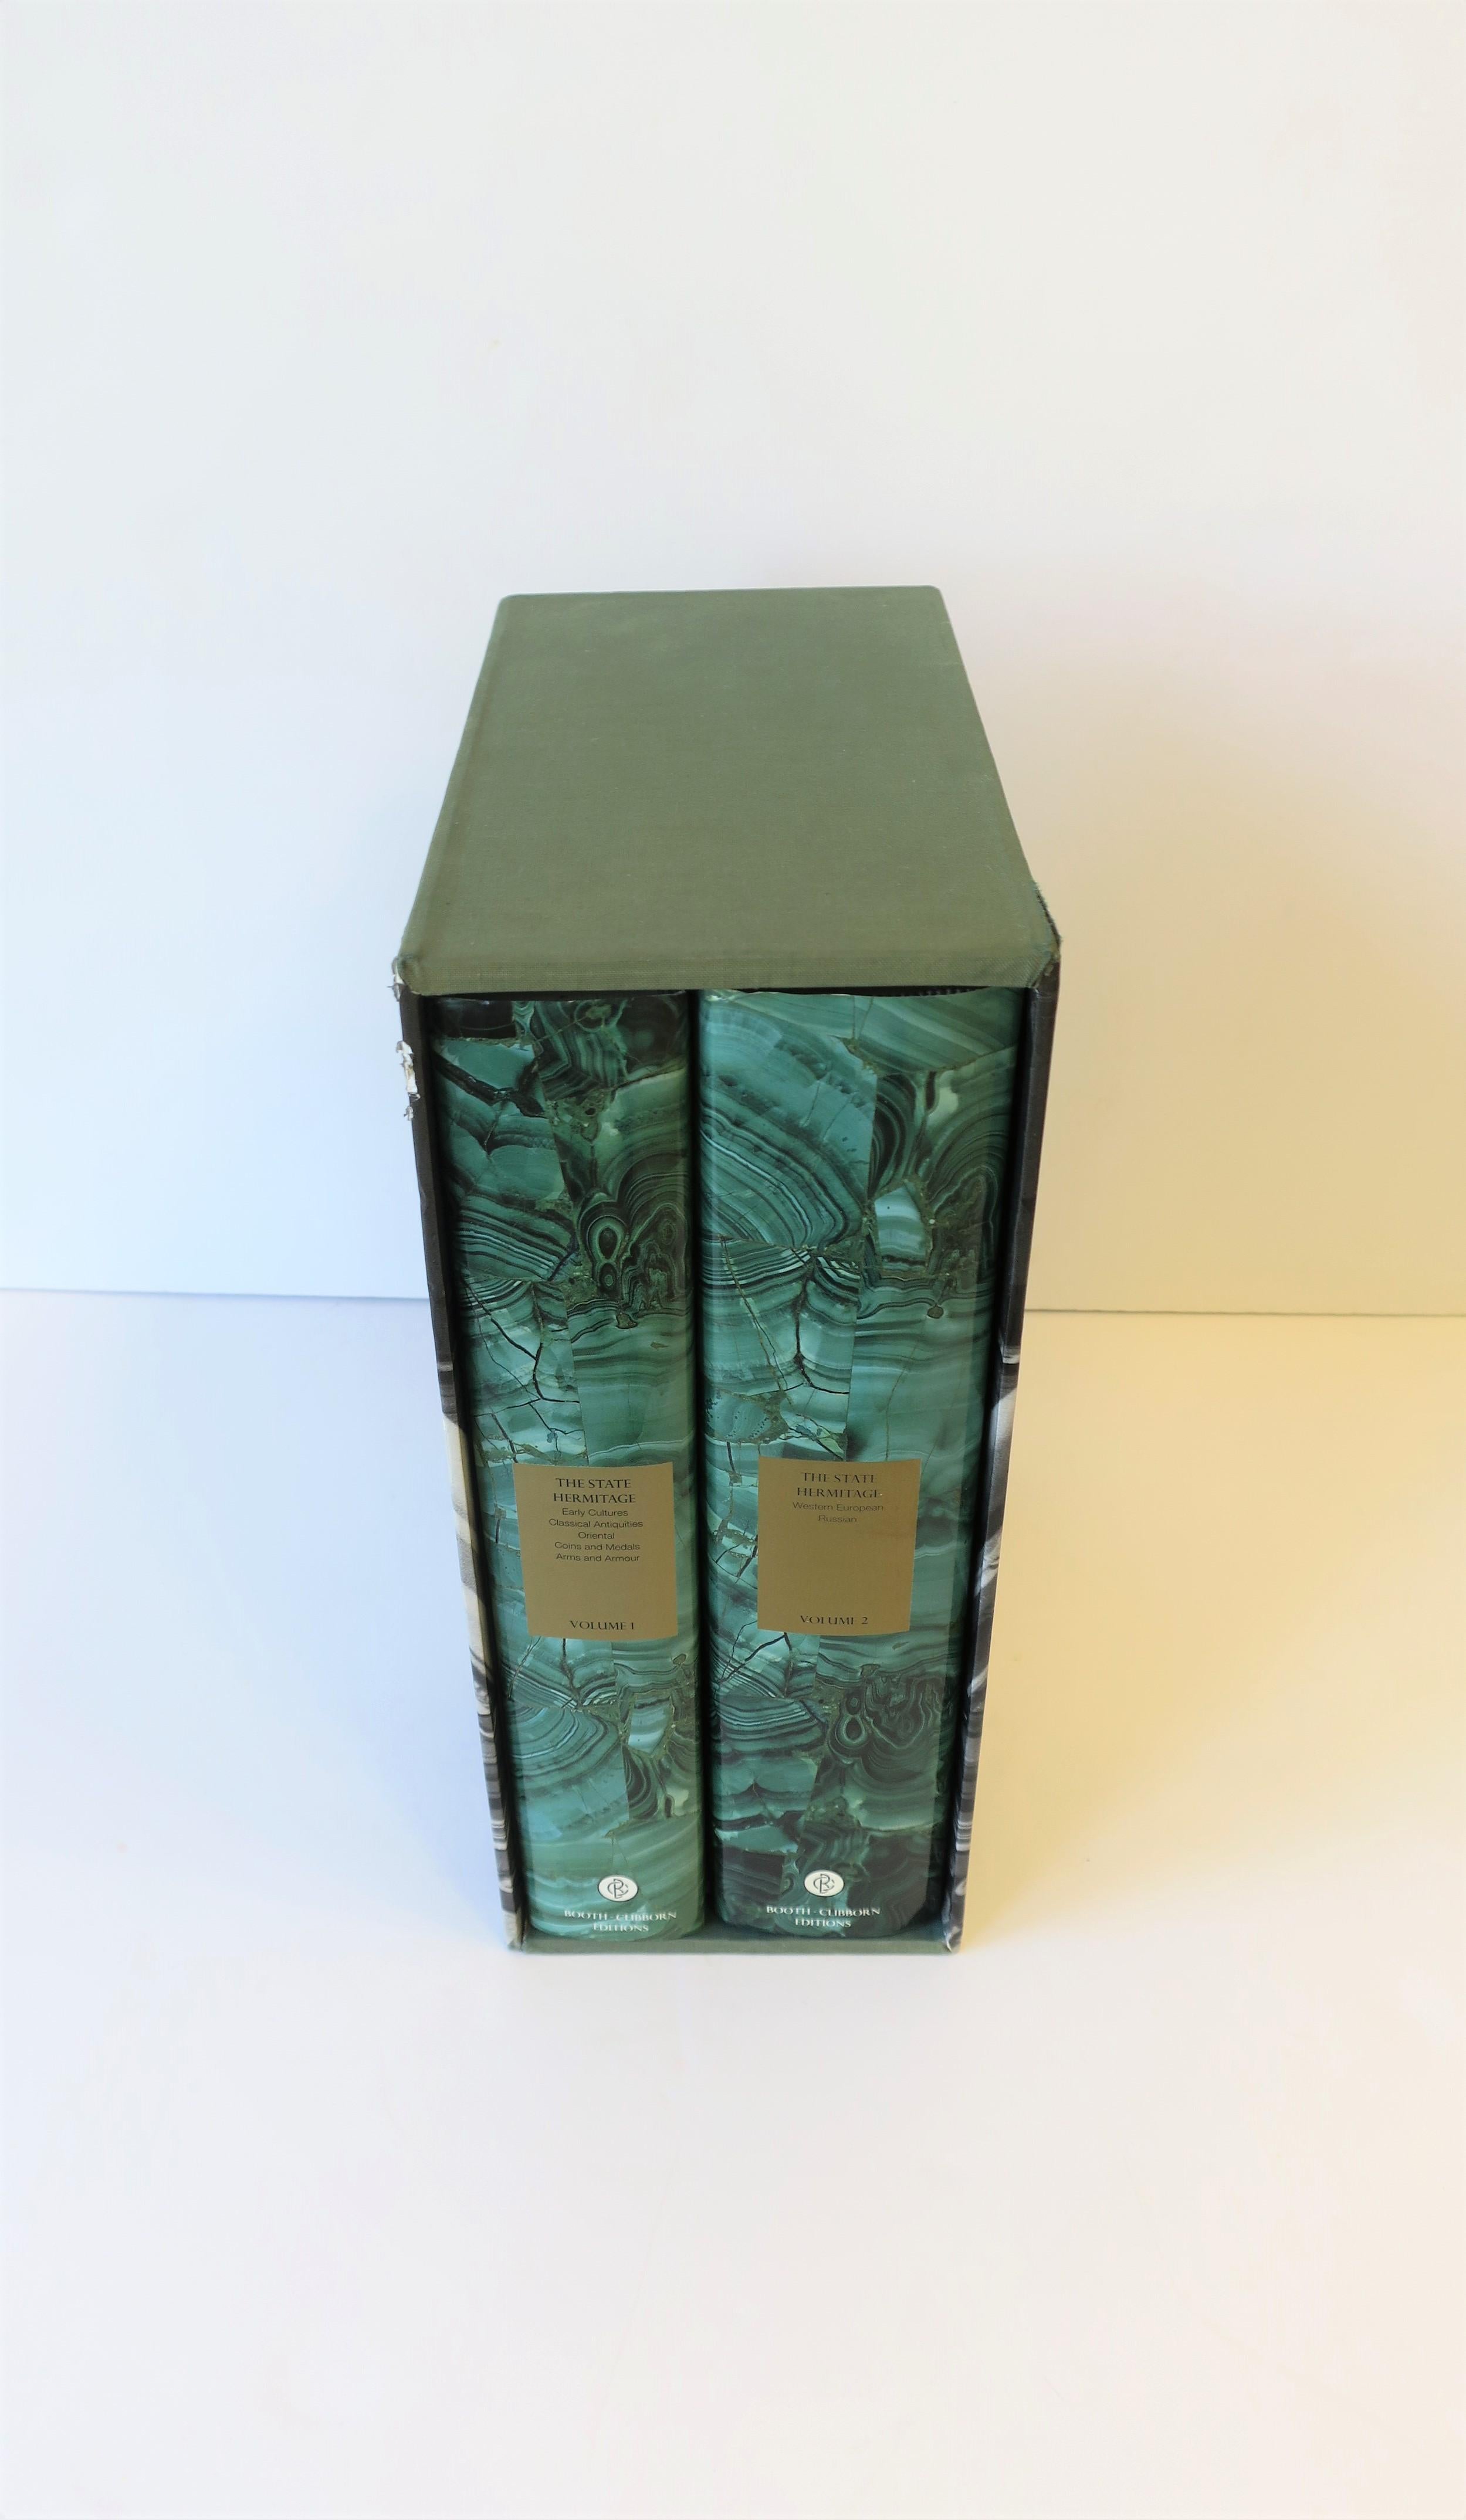 English Hermitage Museum Coffee Table or Library Books with Malachite Green Dust Jackets